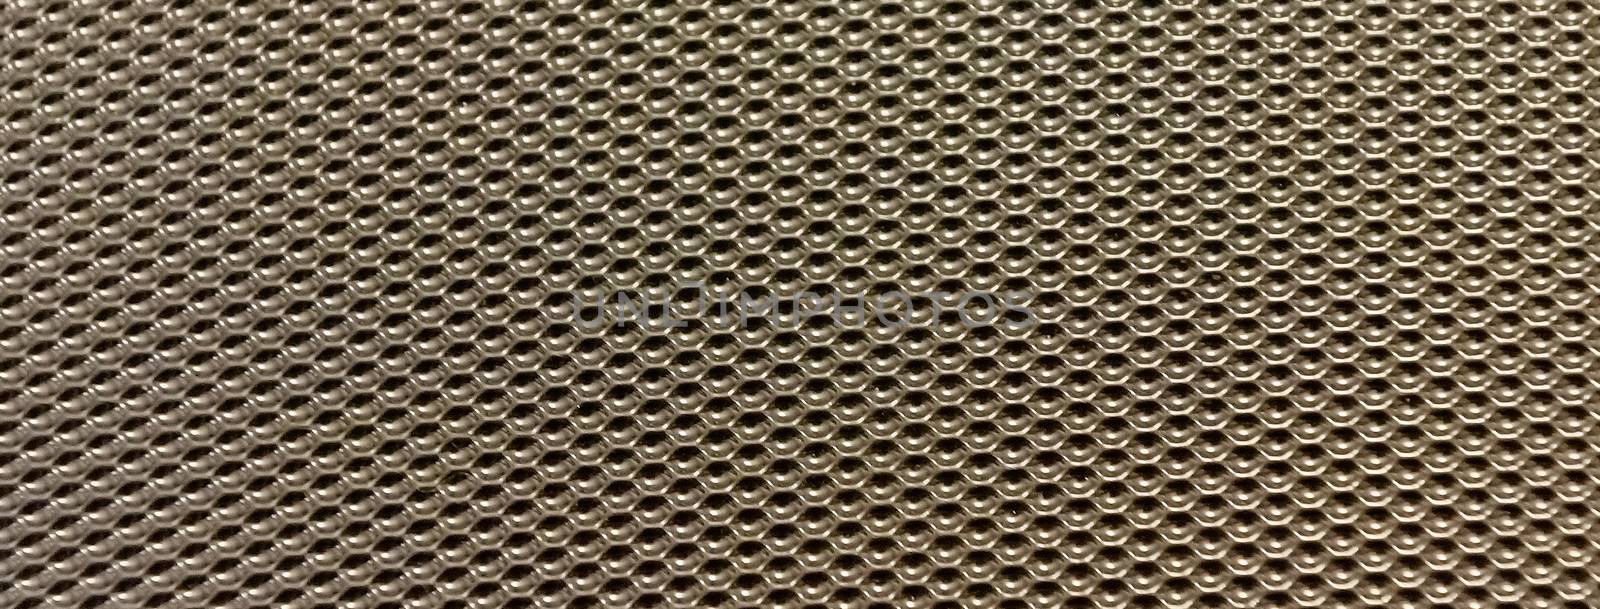 Closeup of a textured fabric background